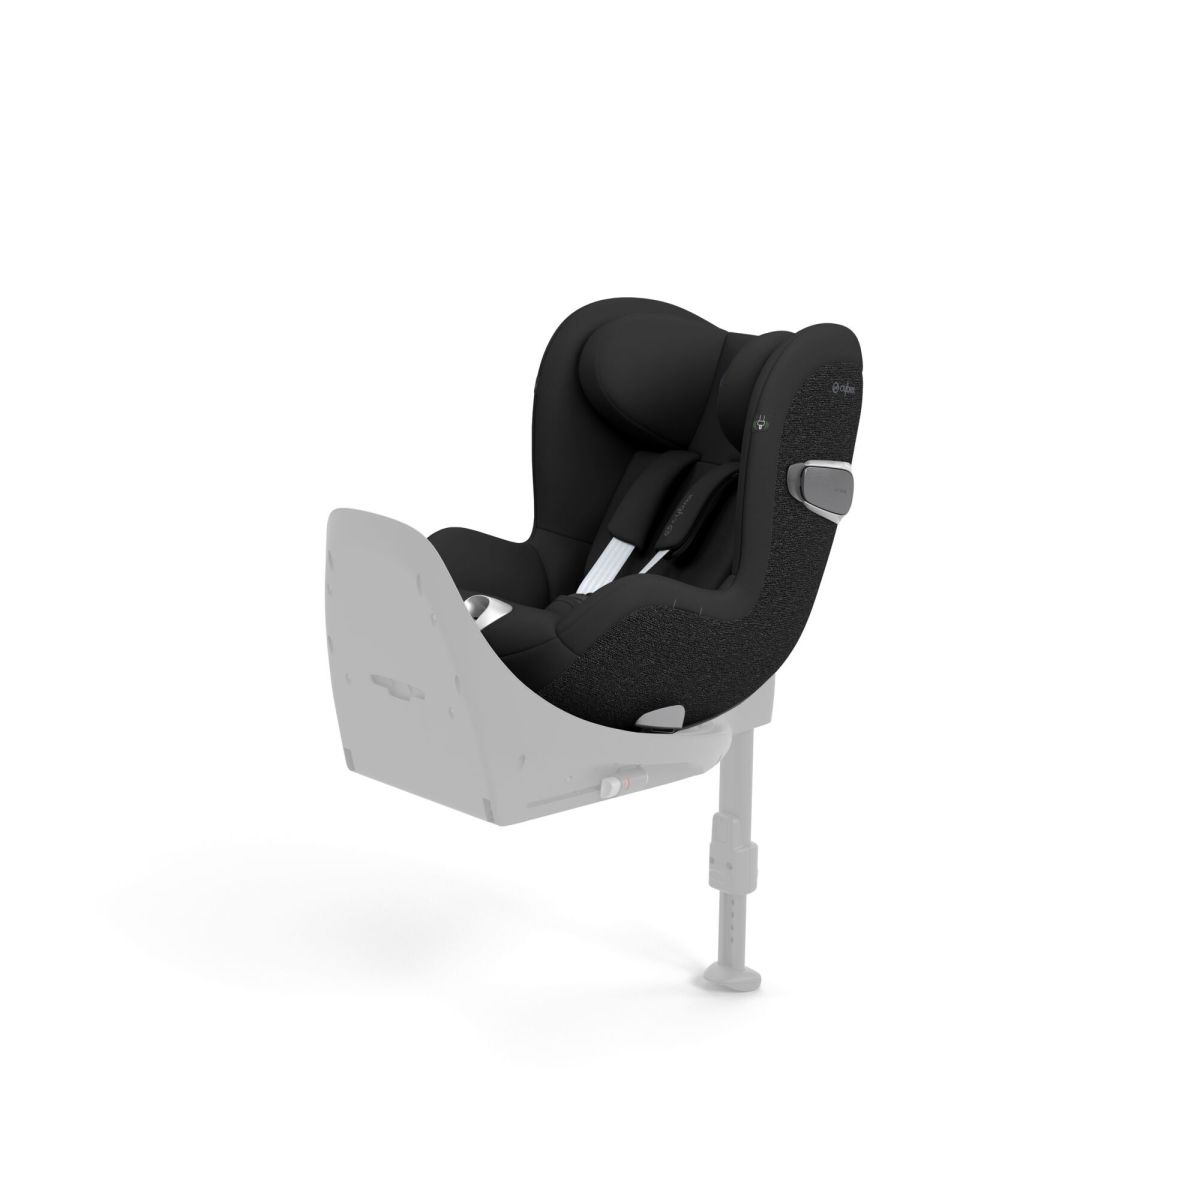 CYBEX Sirona T I-Size car seat sepia black - Group 0+ - 1 (0 to 18kg) - Car  seats - Orchestra